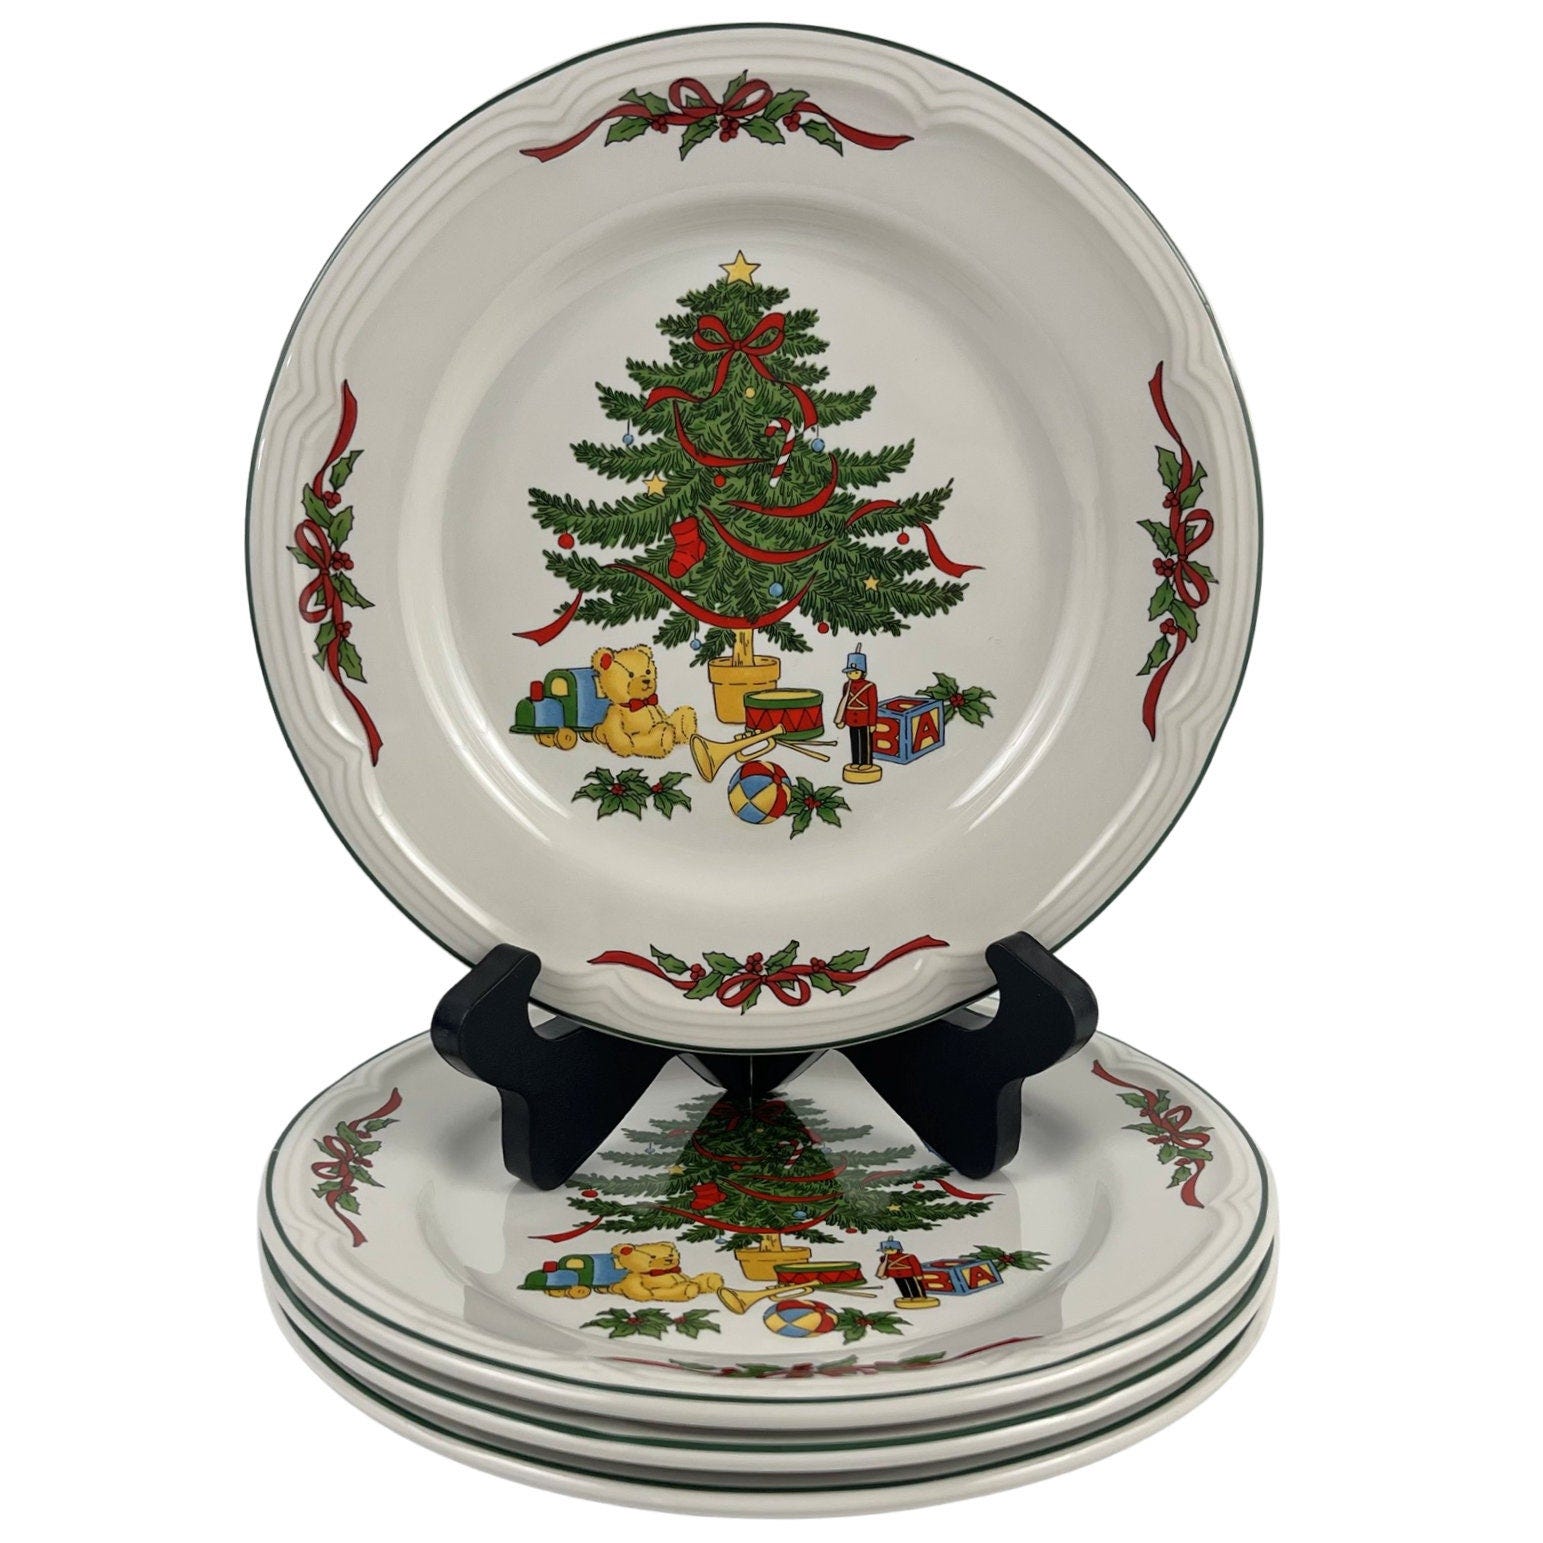 Vitromaster Christmas Tree Salad Dessert Plates Set of 4 Vintage 7 1/2" Stoneware Holly and Berries with Red Ribbon Trim Holiday